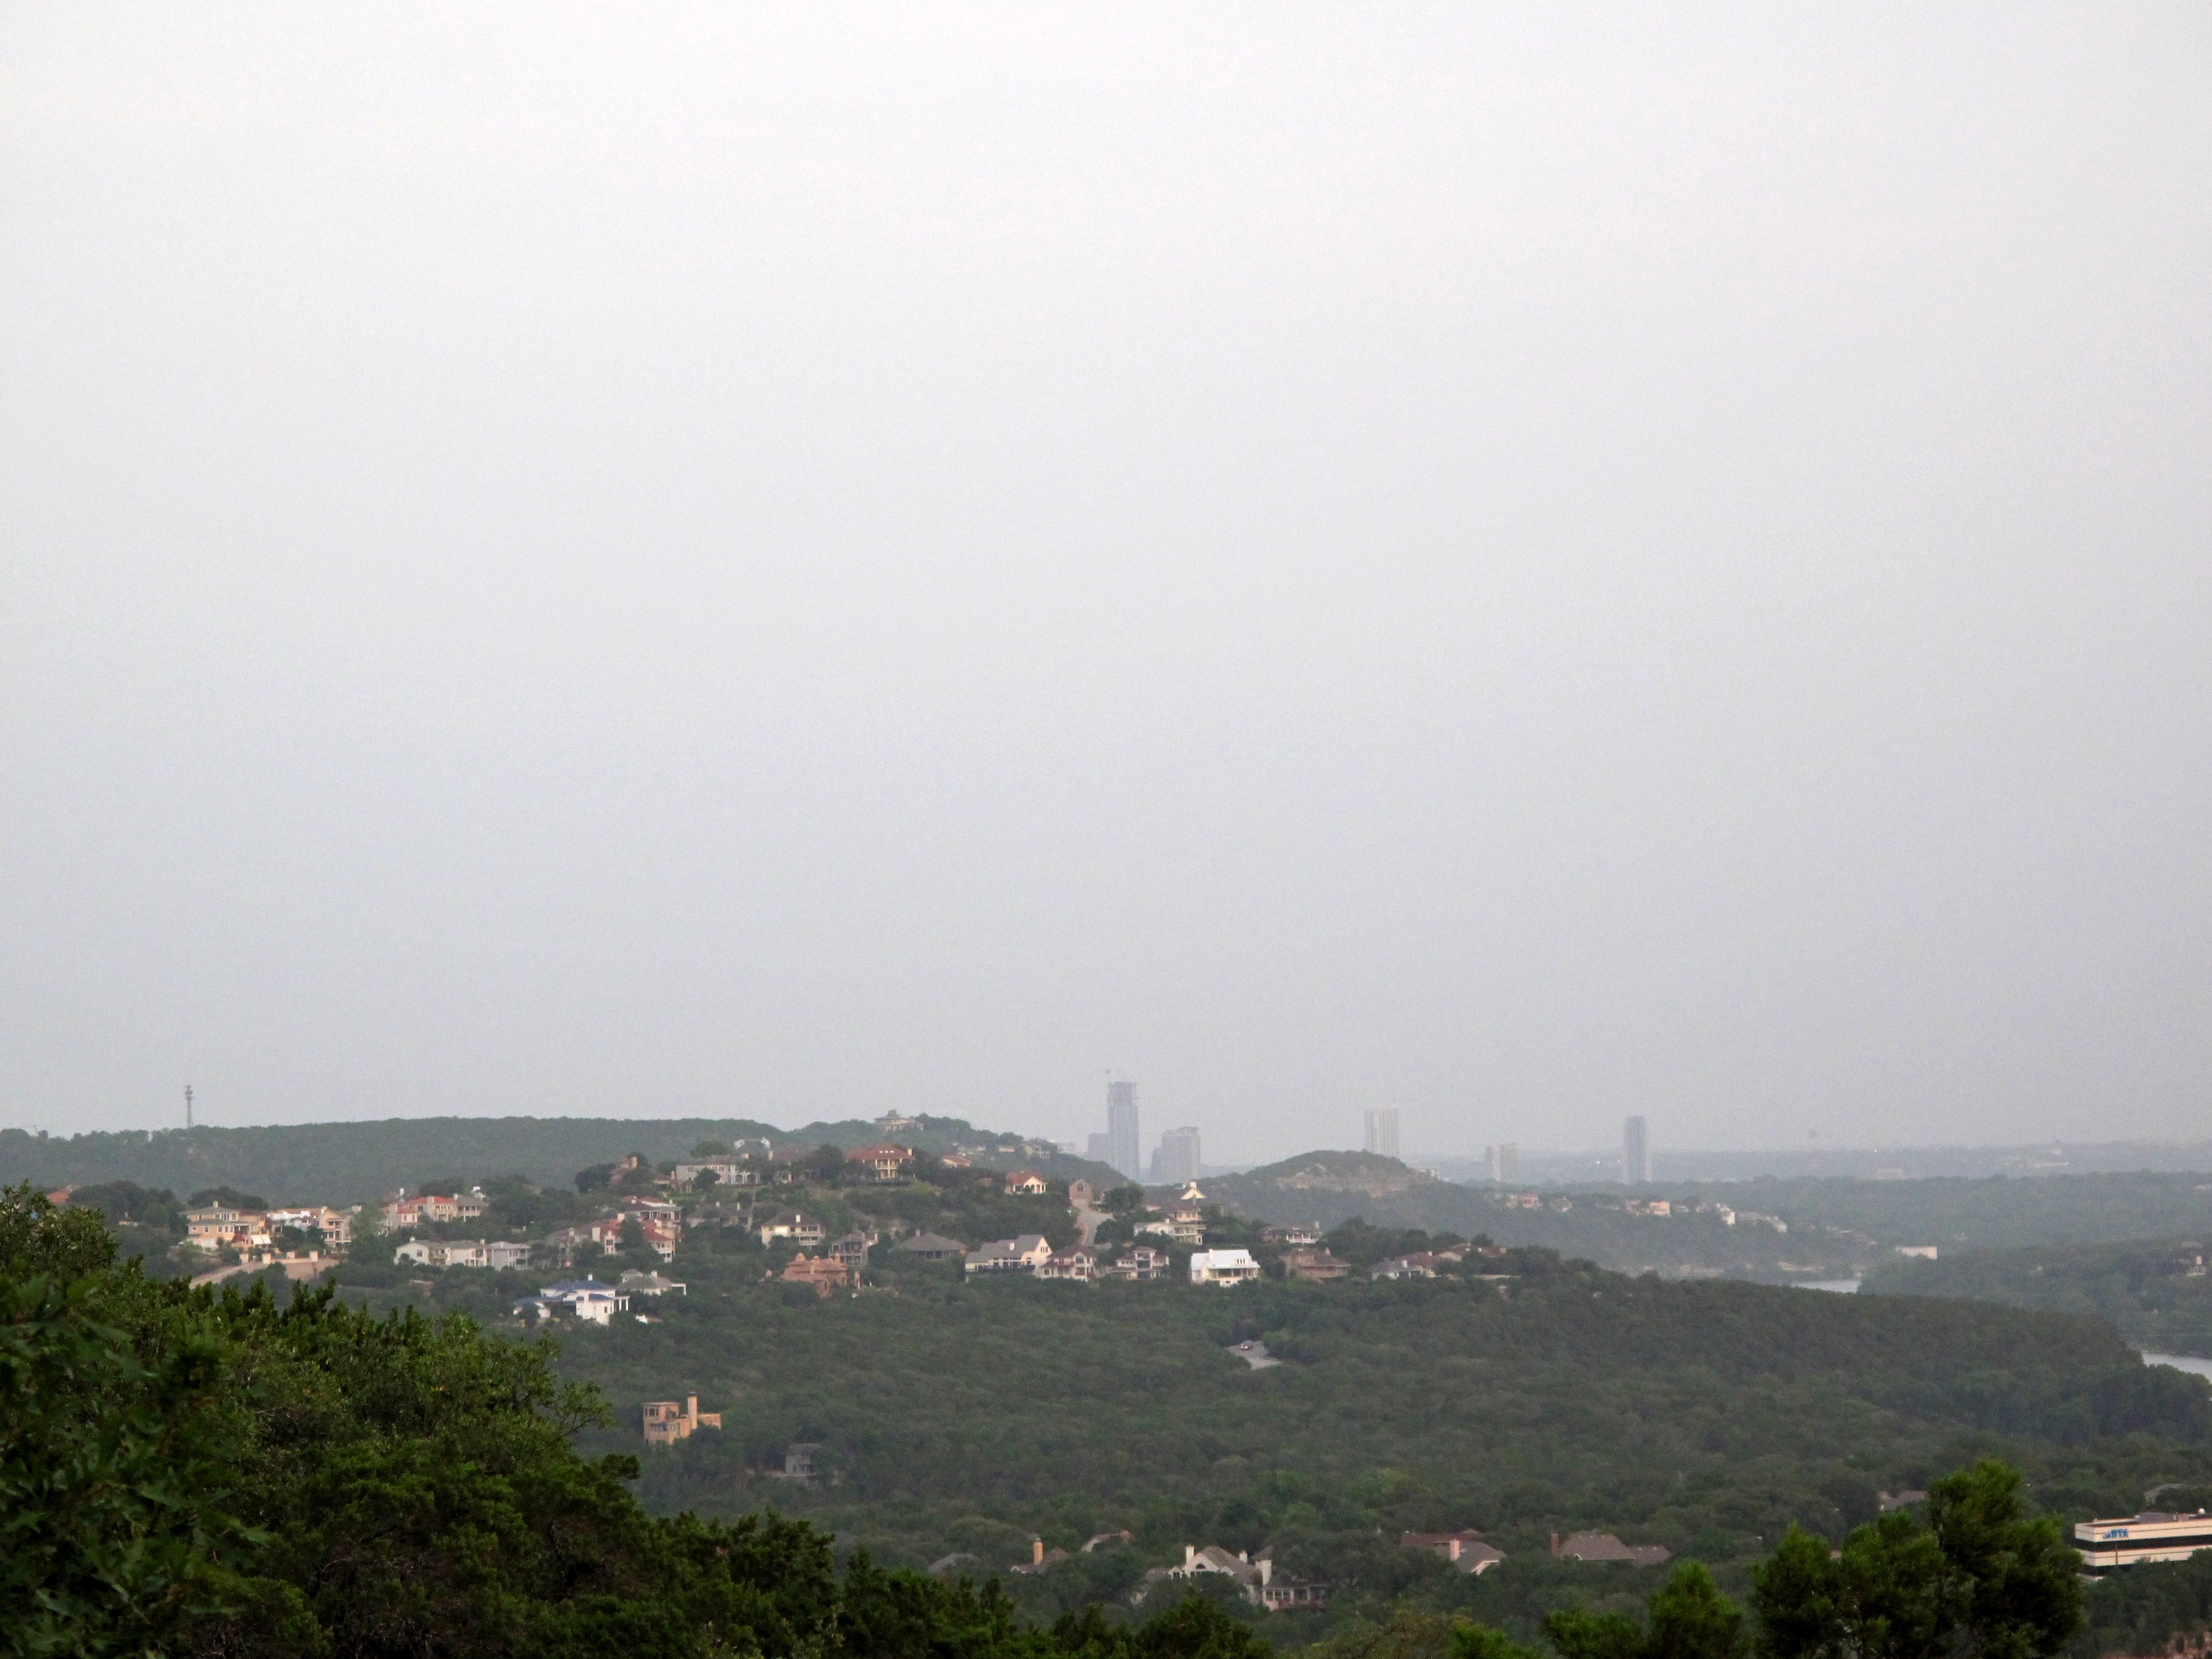 Distant View of Downtown Austin from Northwest Suburbs